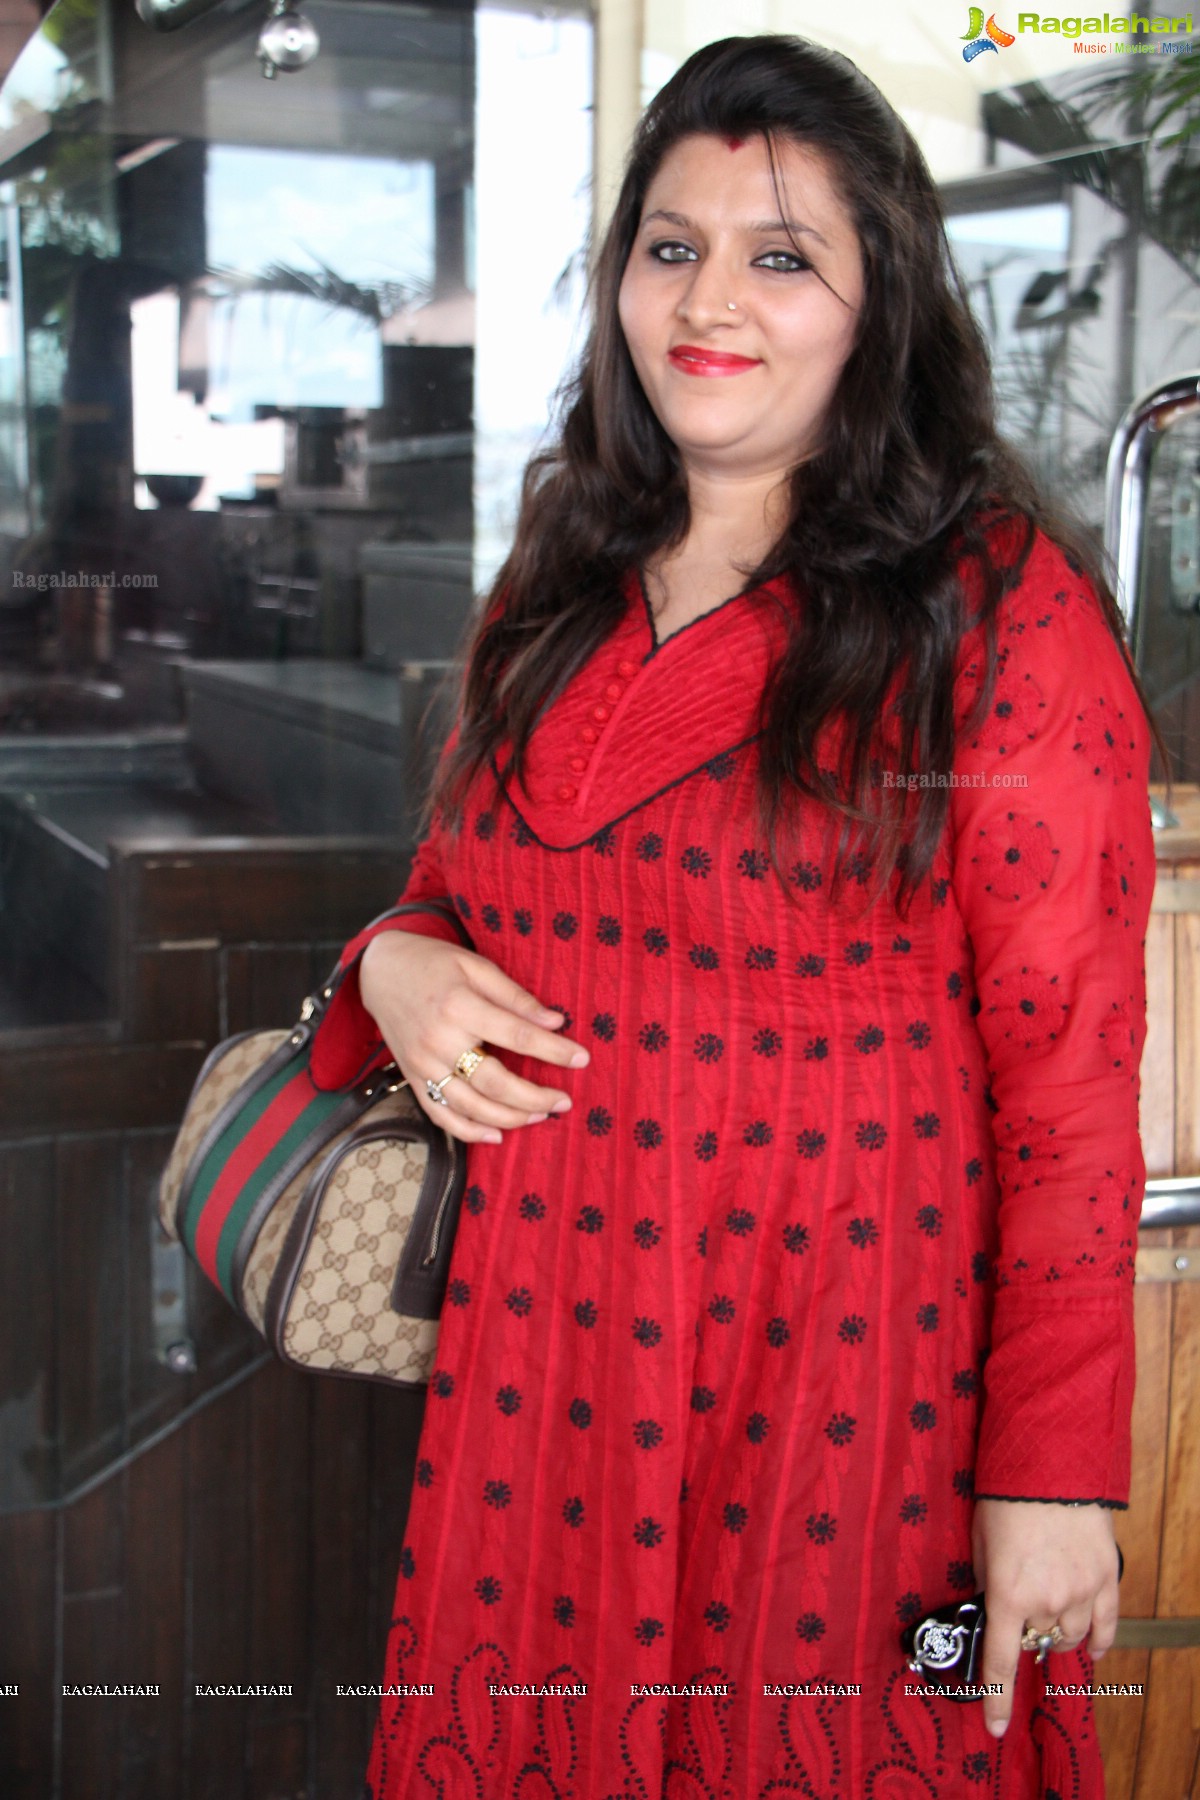 TS Luxury Collection at Over The Moon, Hyderabad (July 24, 2014)